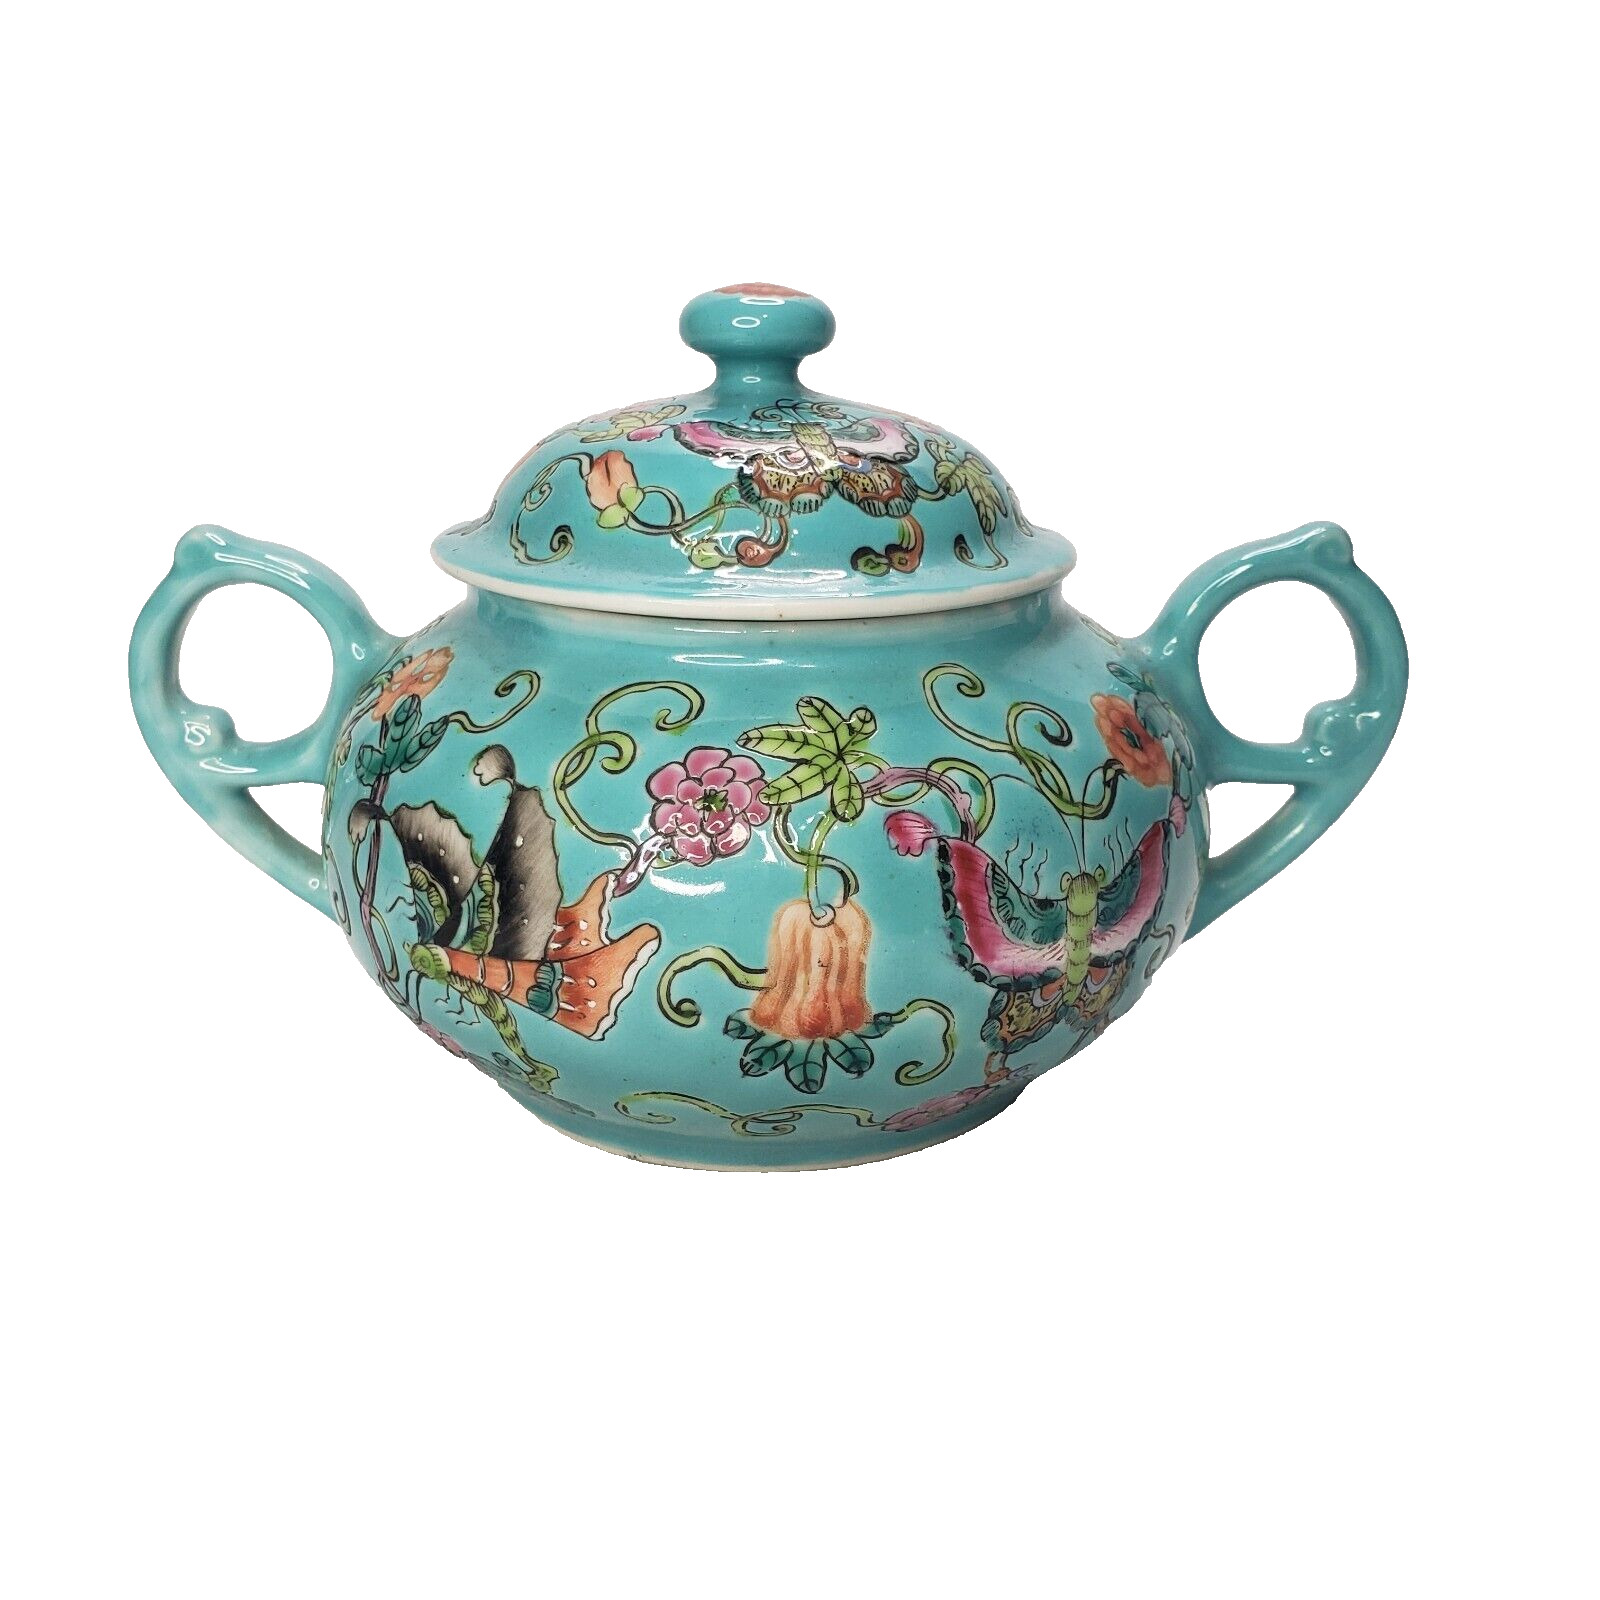 Antique Chinese FAMILLE ROSE Porcelain Sugar Bowl Motif on a Turquoise Ground